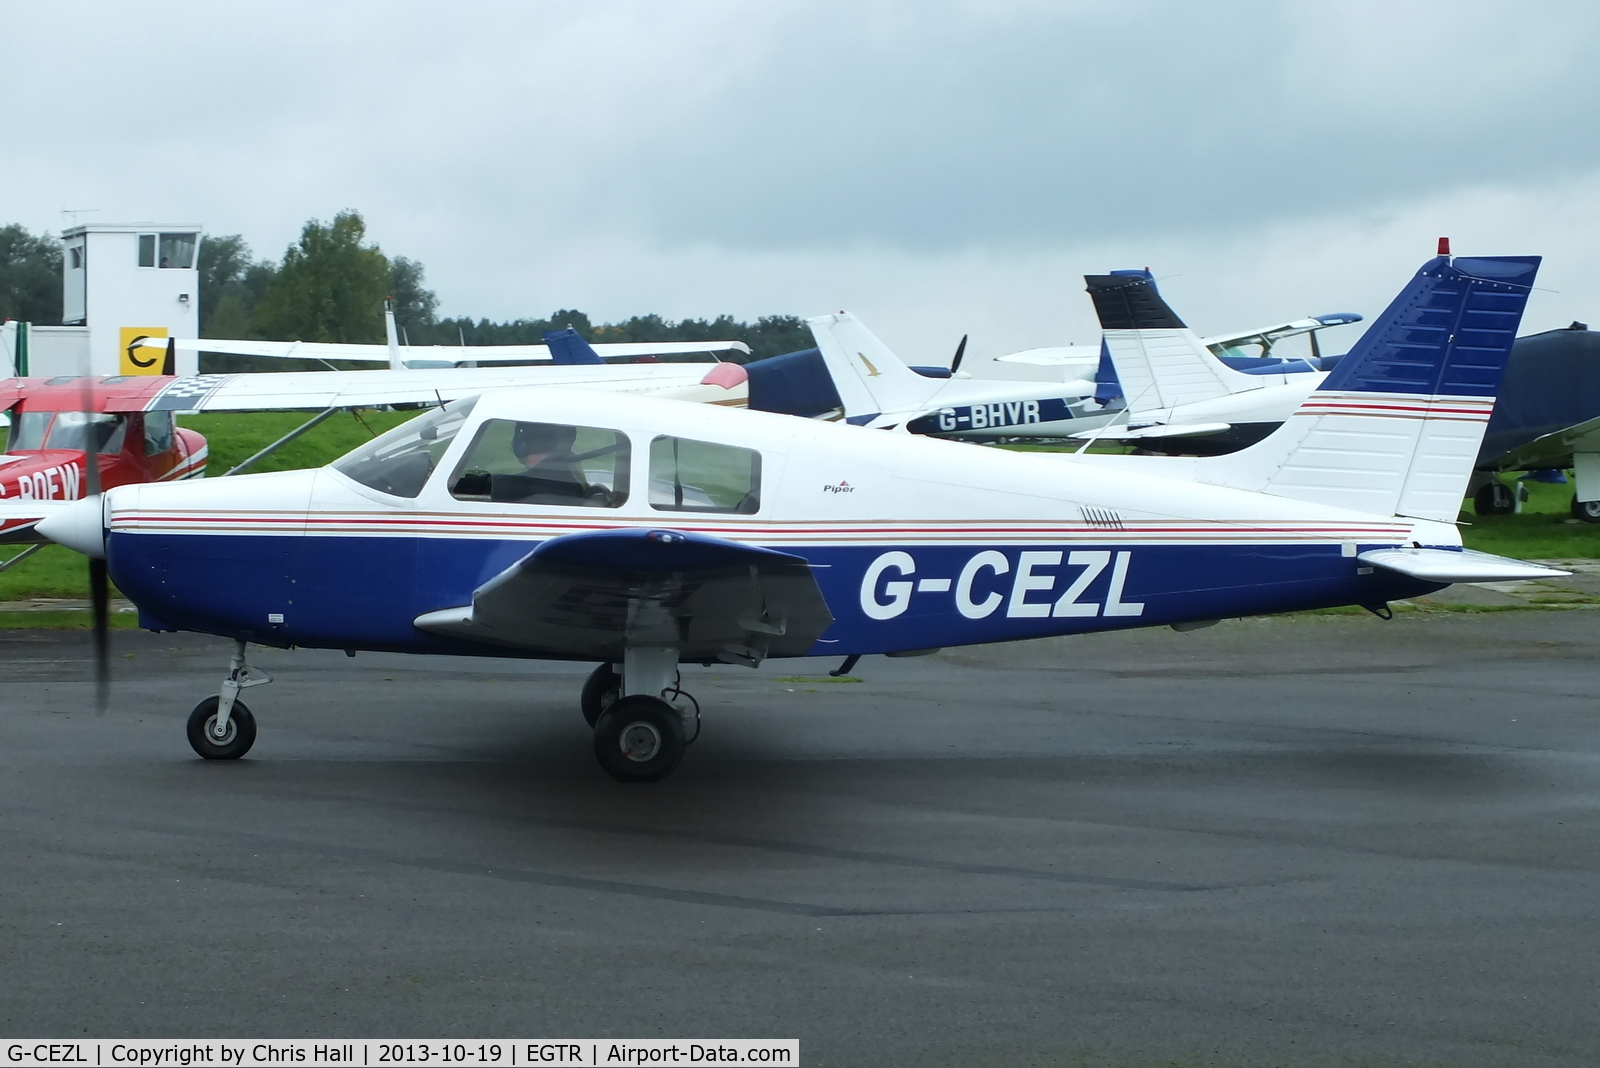 G-CEZL, 1989 Piper PA-28-161 Cadet C/N 2841247, ex Cabair, now operated by Charley Ltd